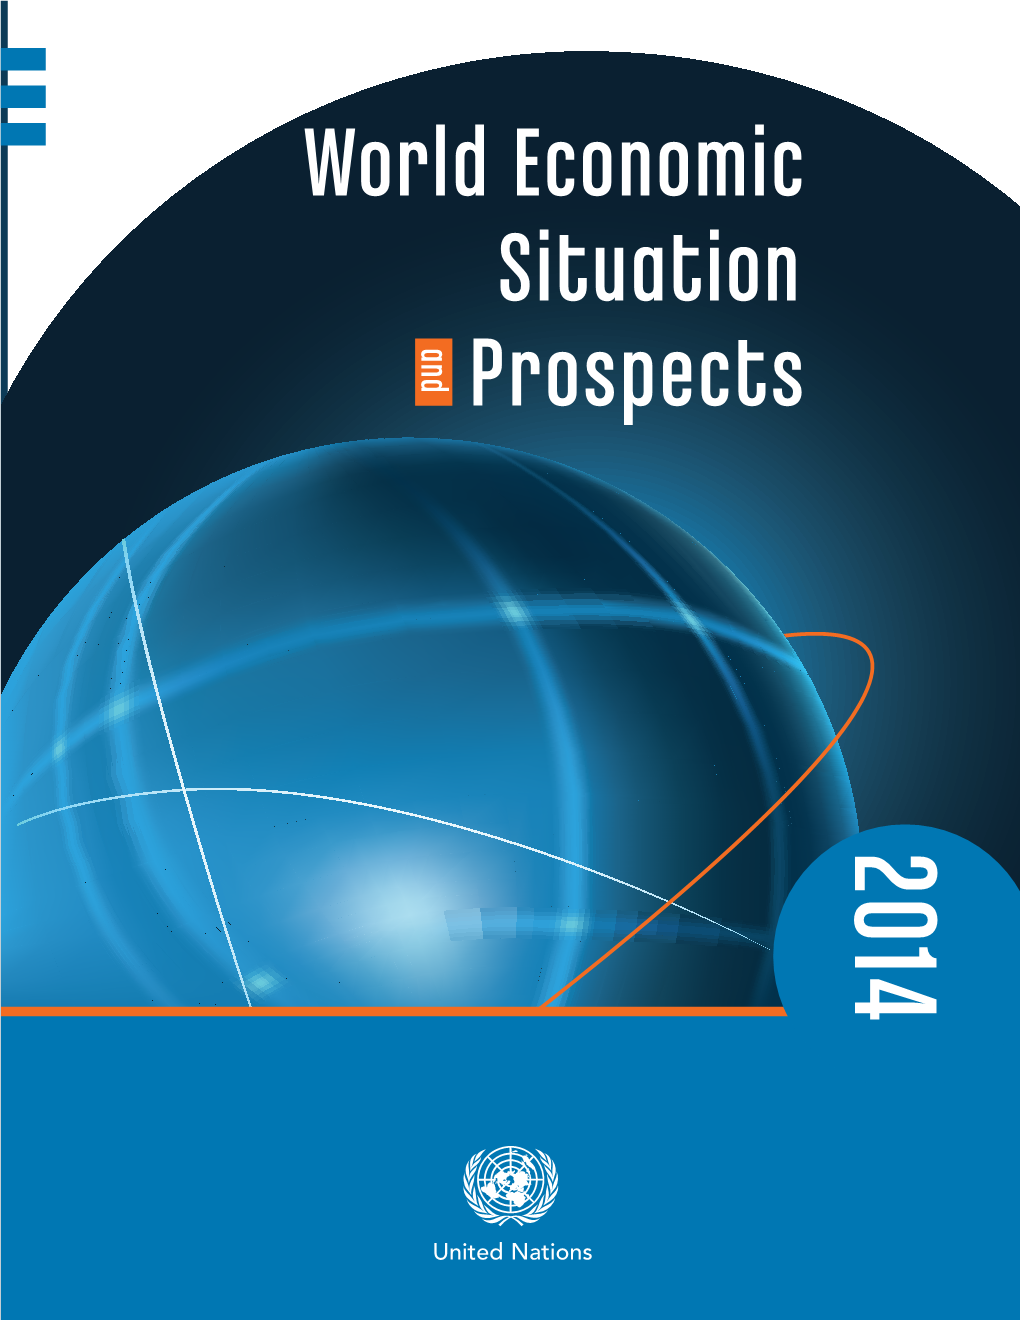 World Economic Situation and Prospects 2014